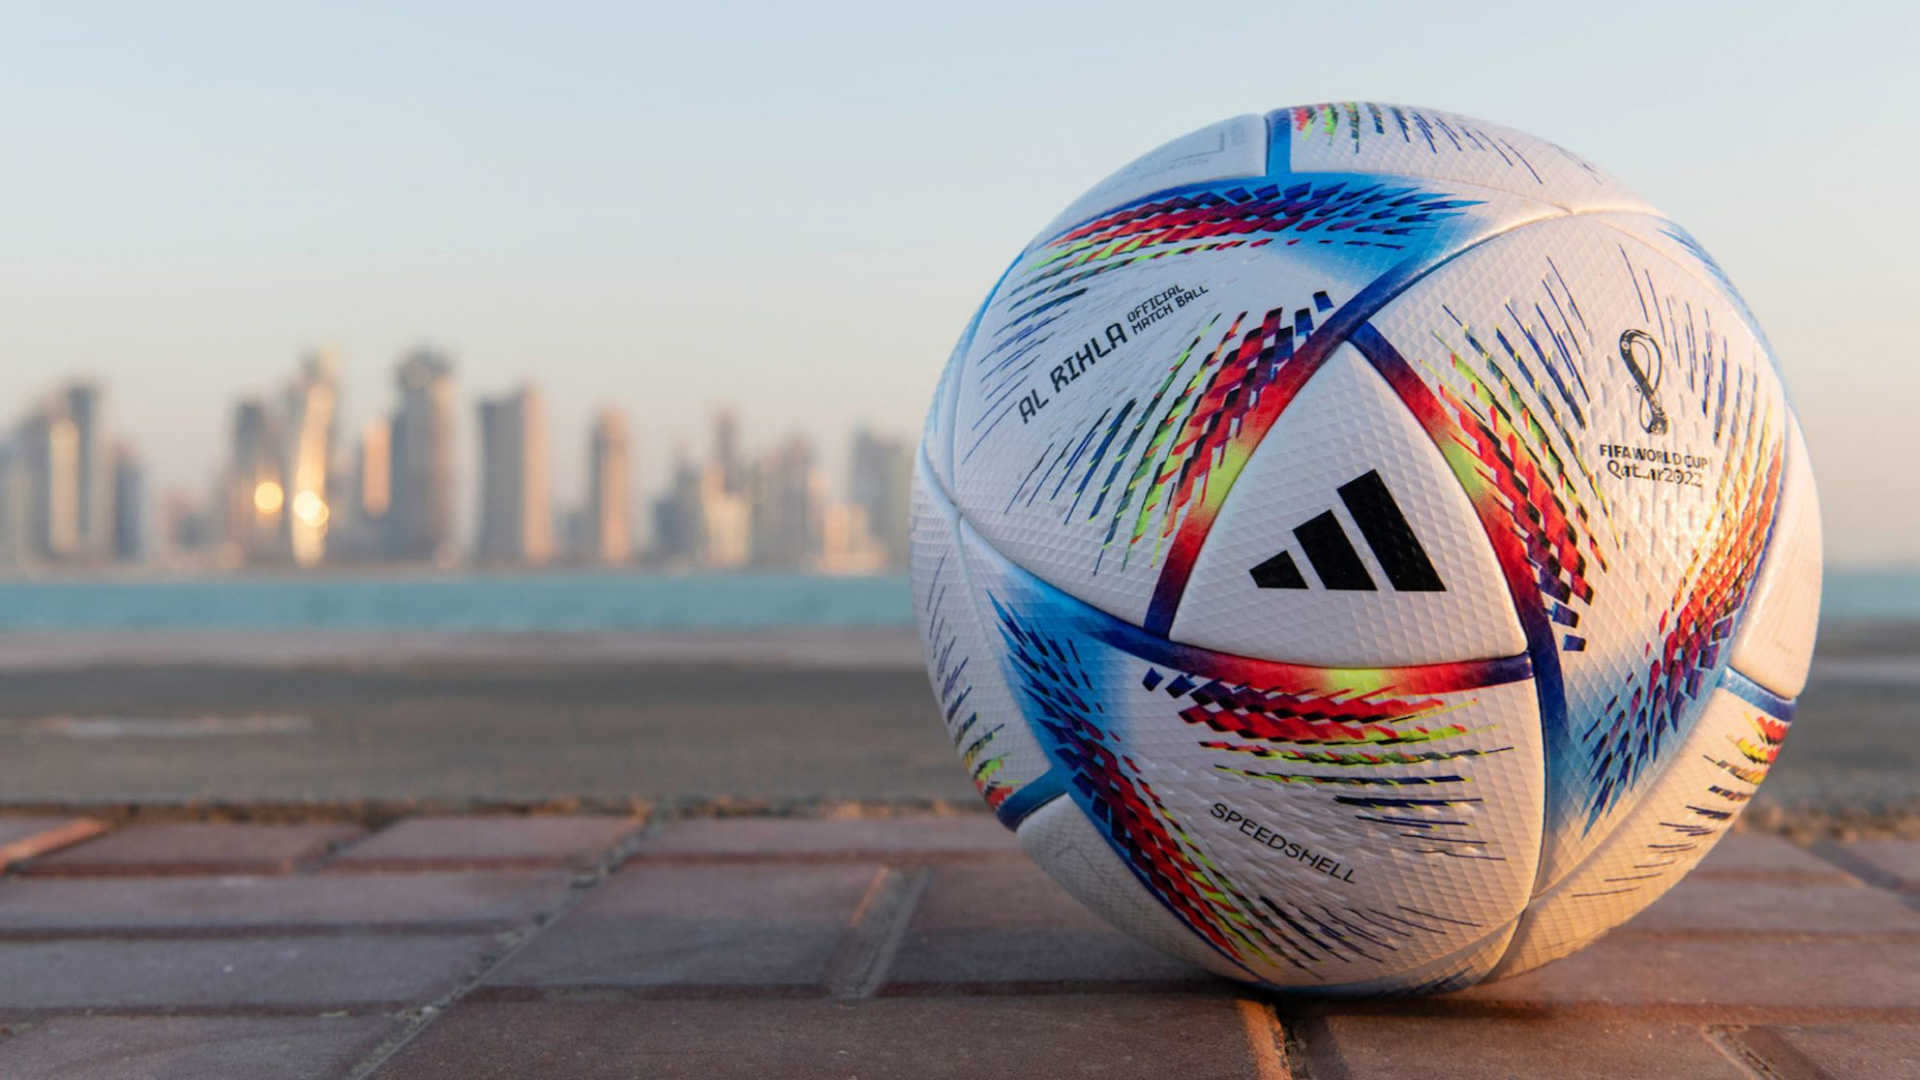 Image of the official soccer ball of the FIFA World Cup 2022